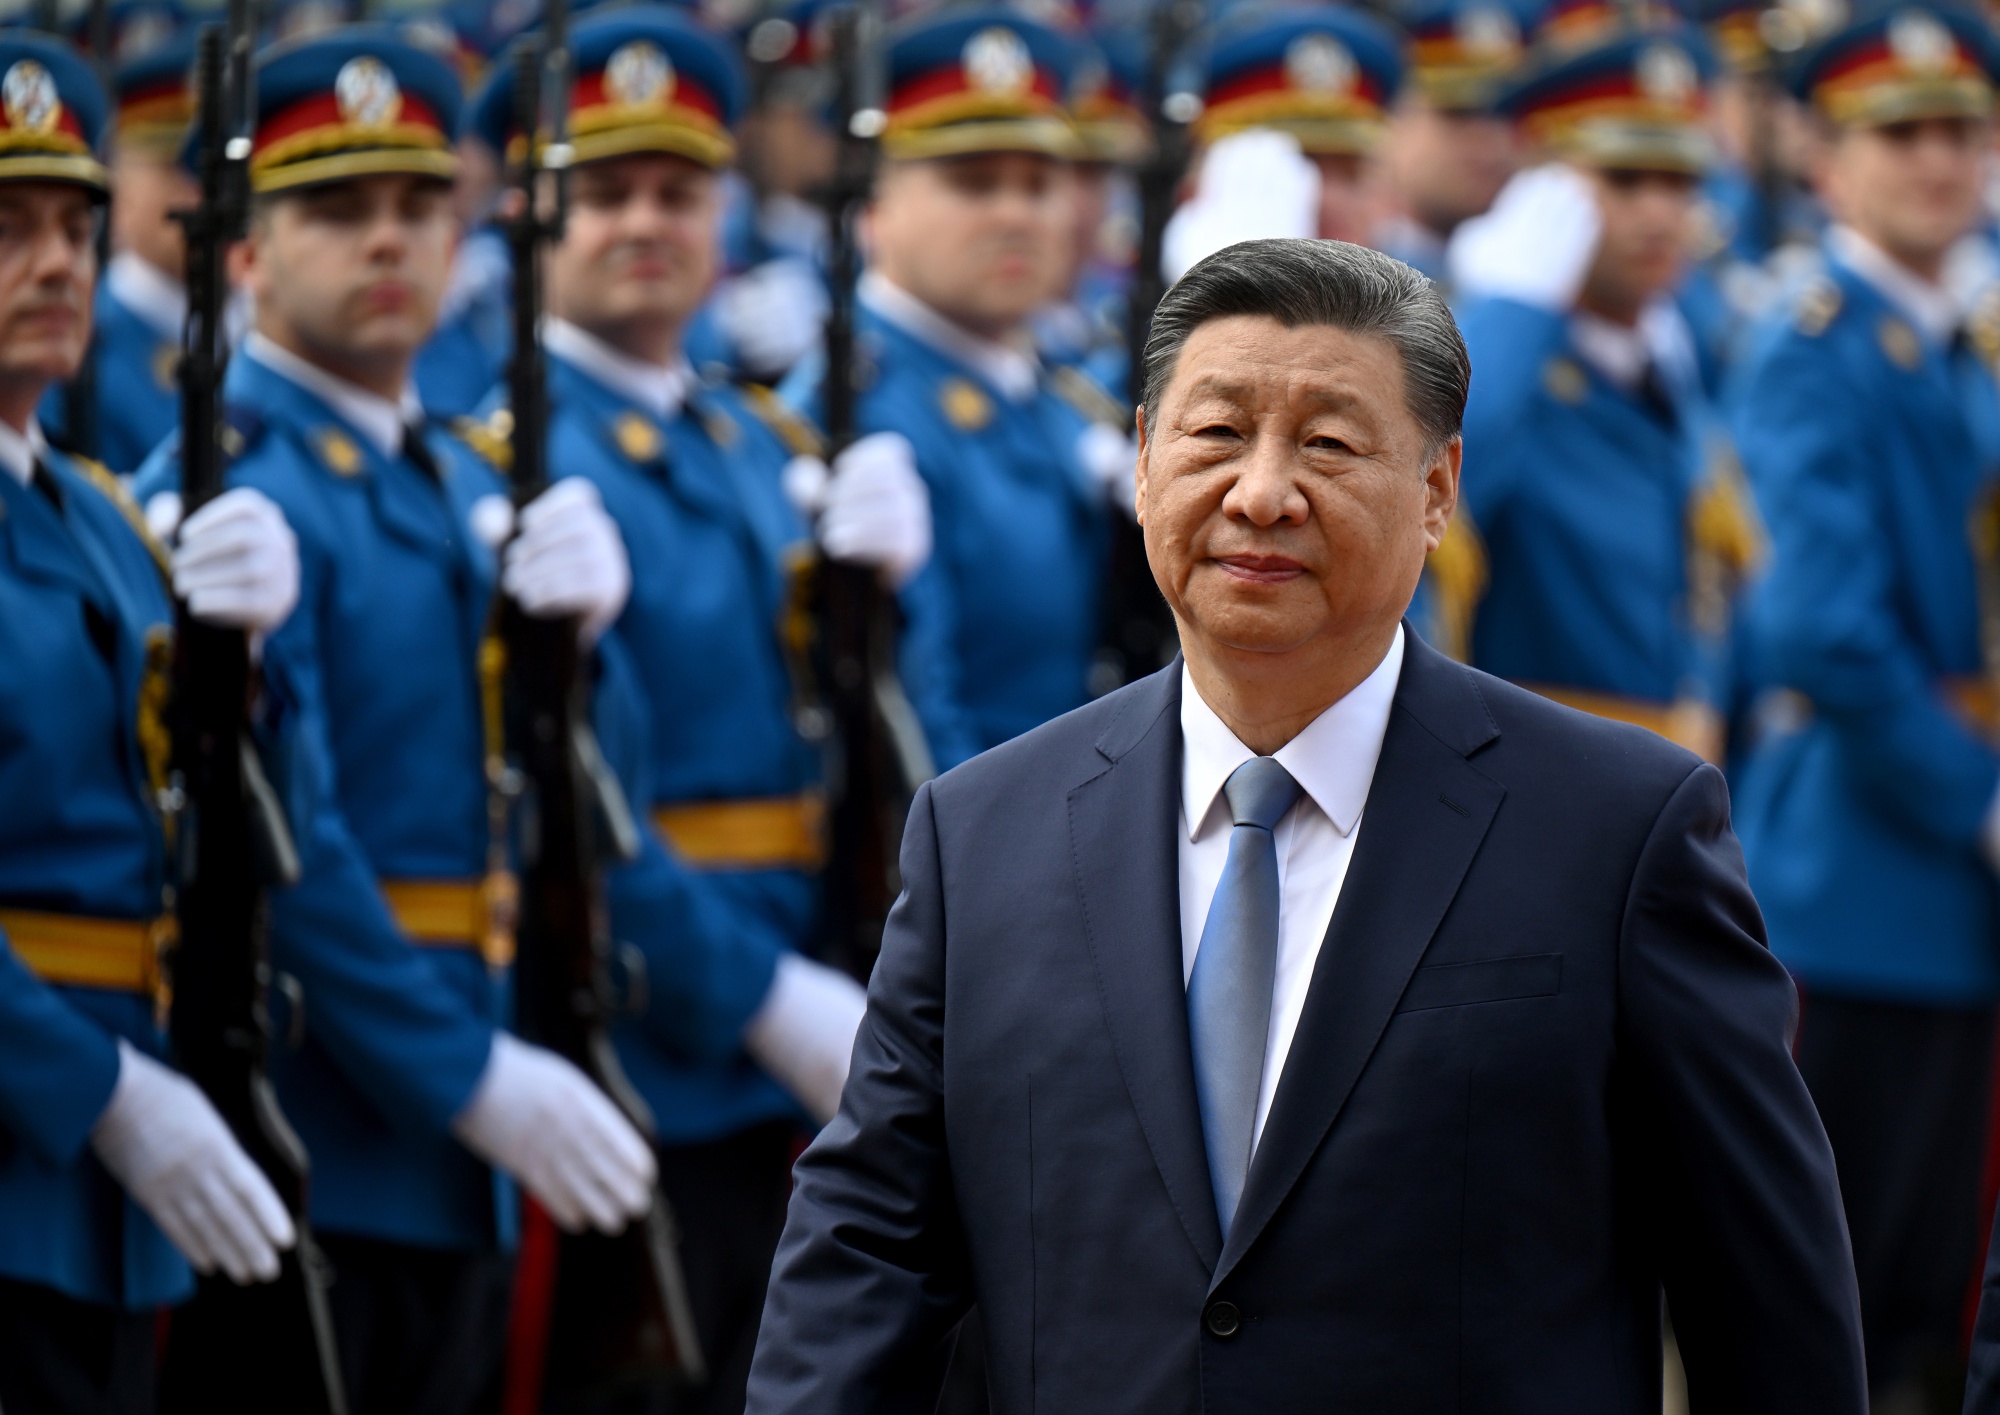 China's President Xi in Serbia to Bolster Relations With Europe's East